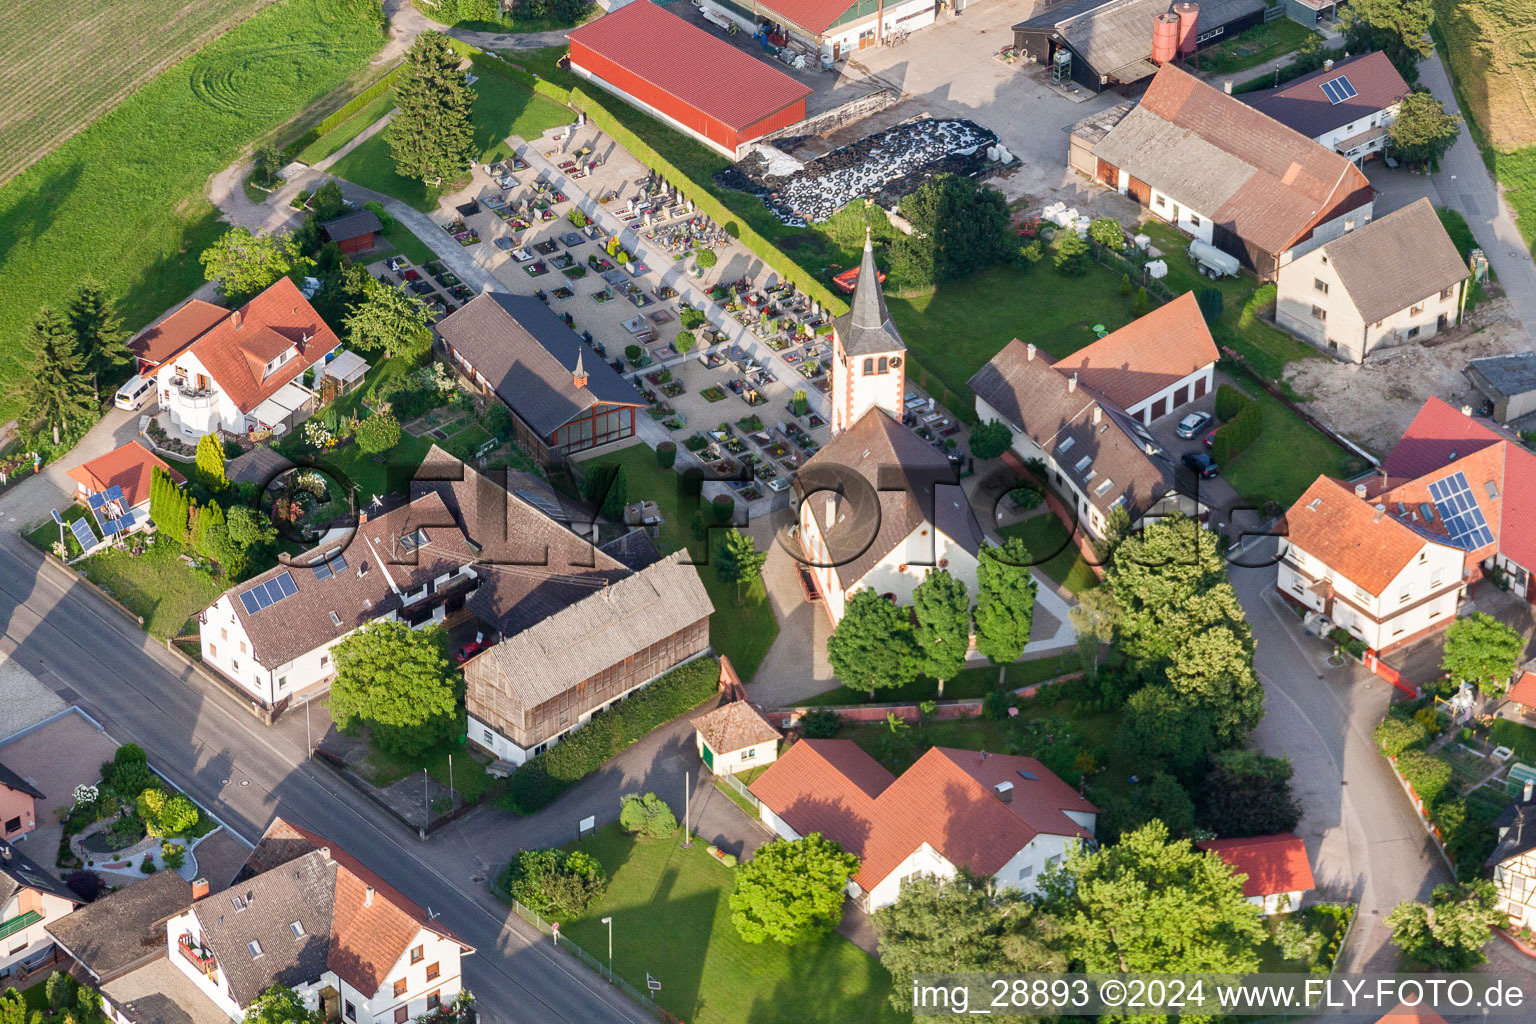 Aerial photograpy of Village view in the district Linx in Rheinau in the state Baden-Wurttemberg, Germany